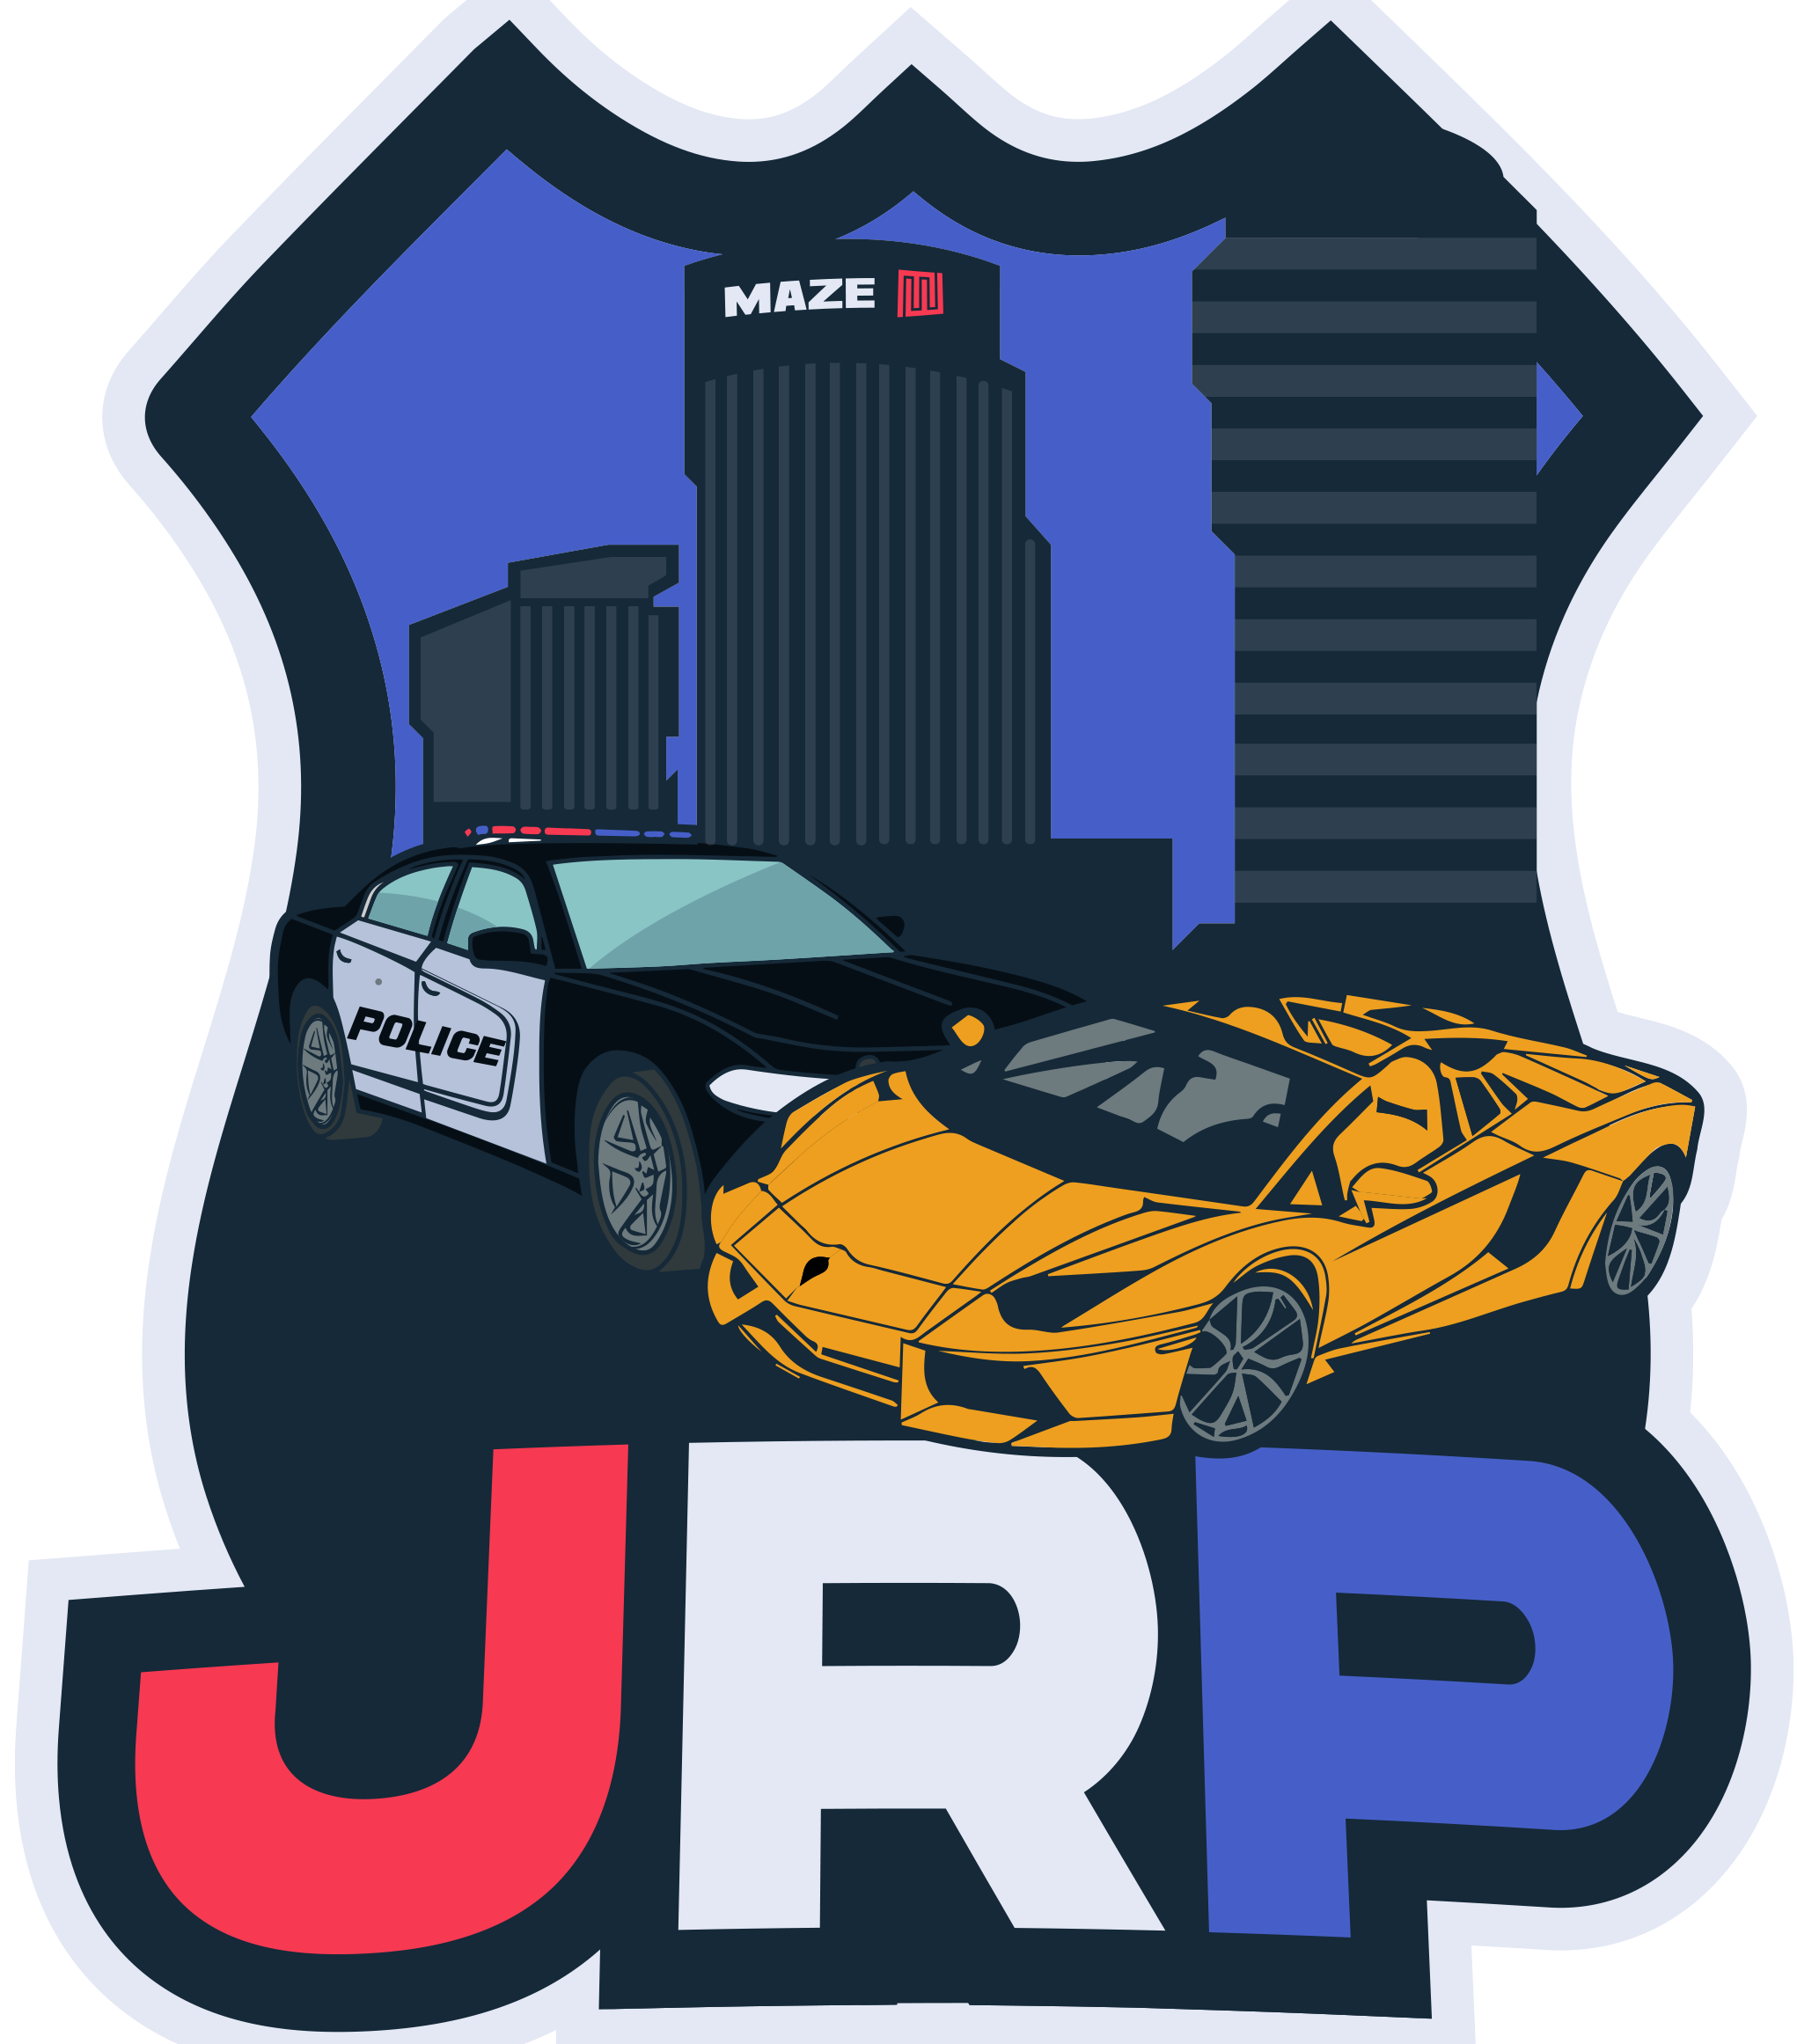 JusticeRP logo featuring a car, red white and blue lettering, and a blue city background.